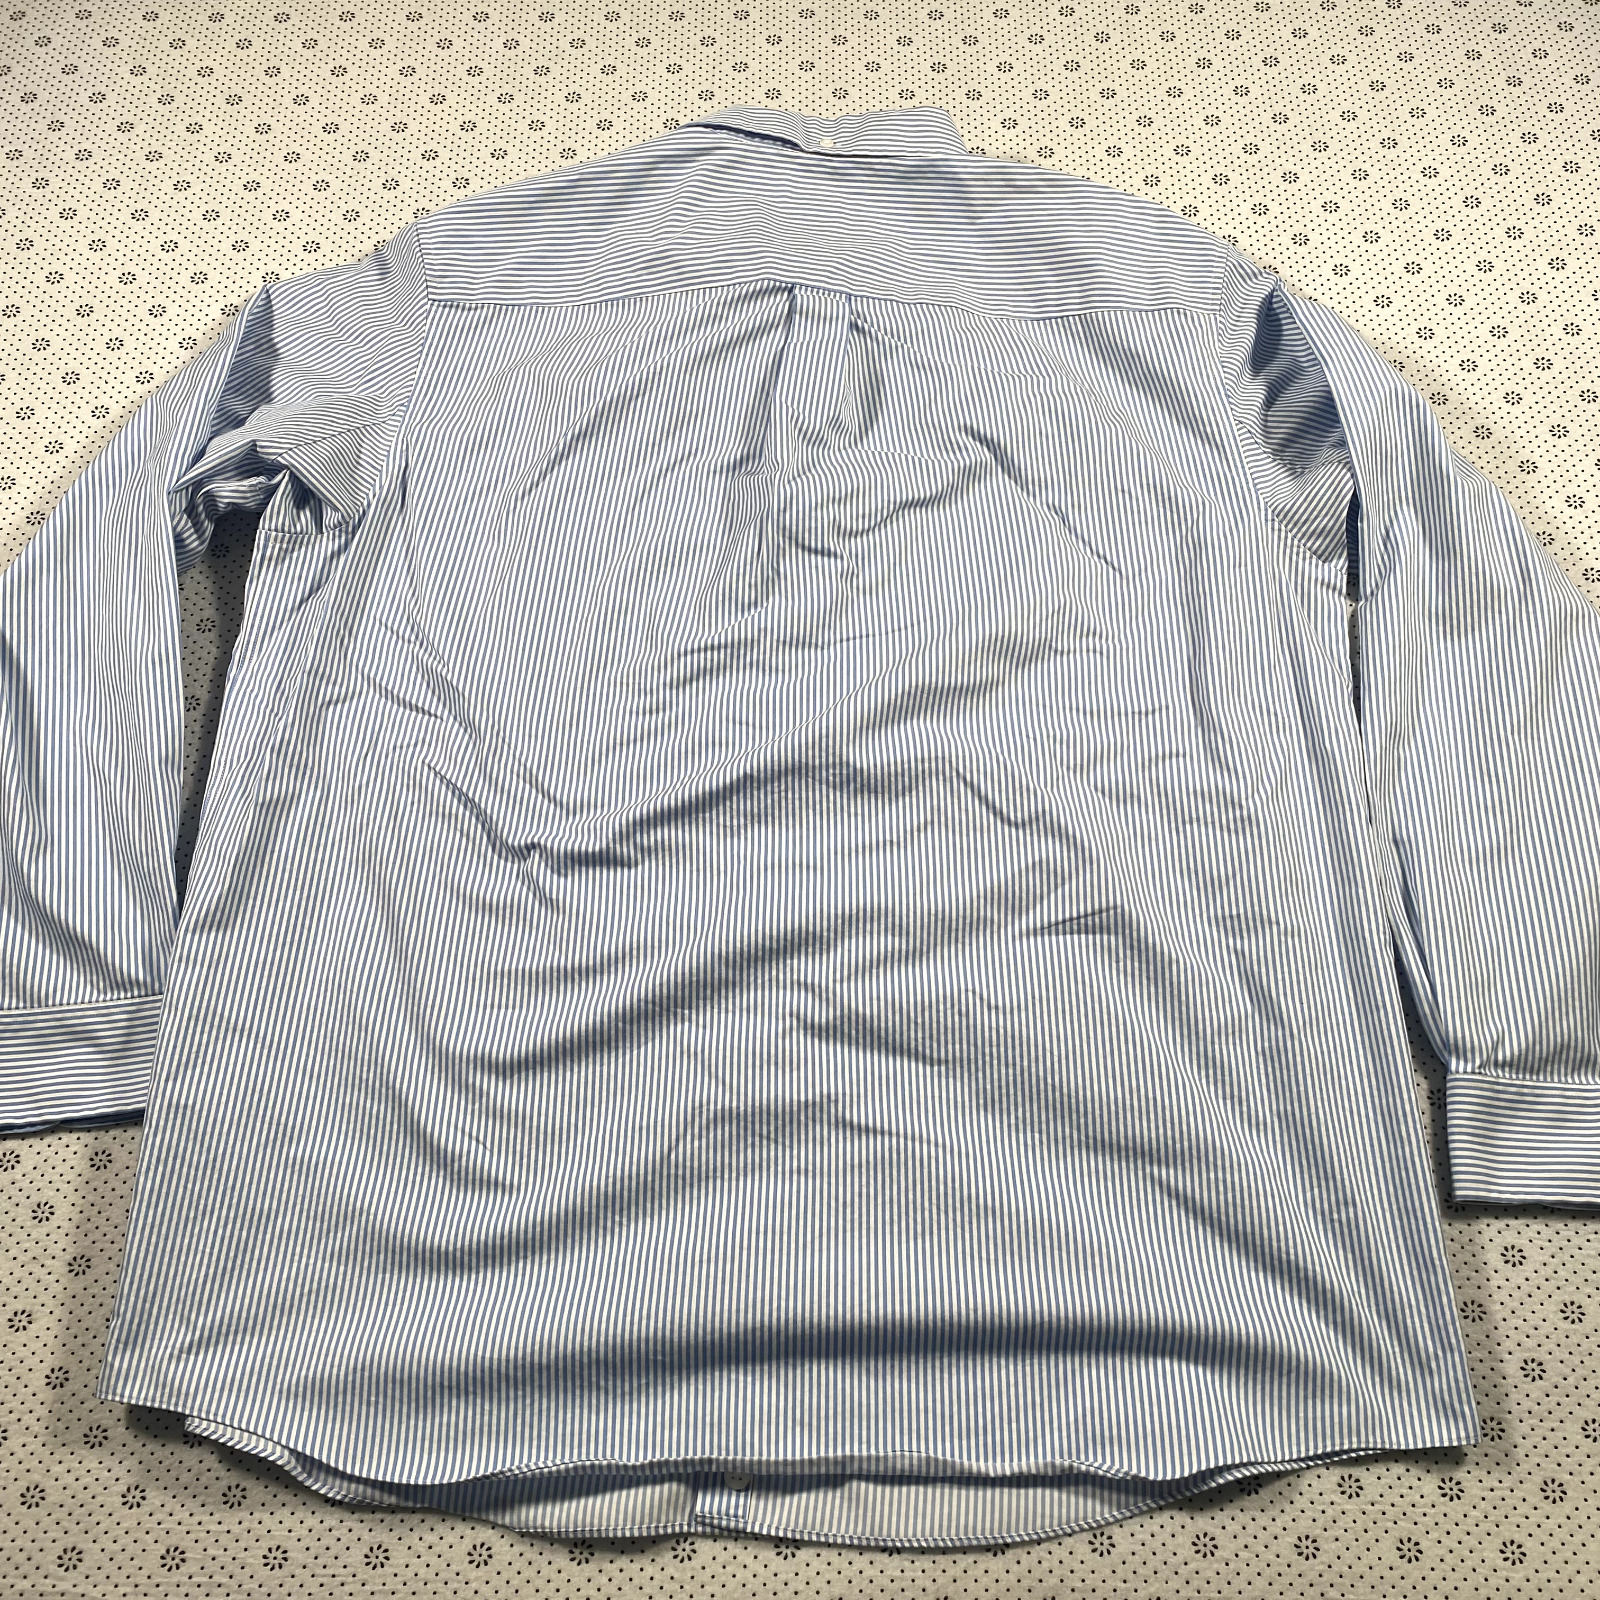 Duluth Trading Co Wrinkle Fighter Mens Xl Tall Lo… - image 8